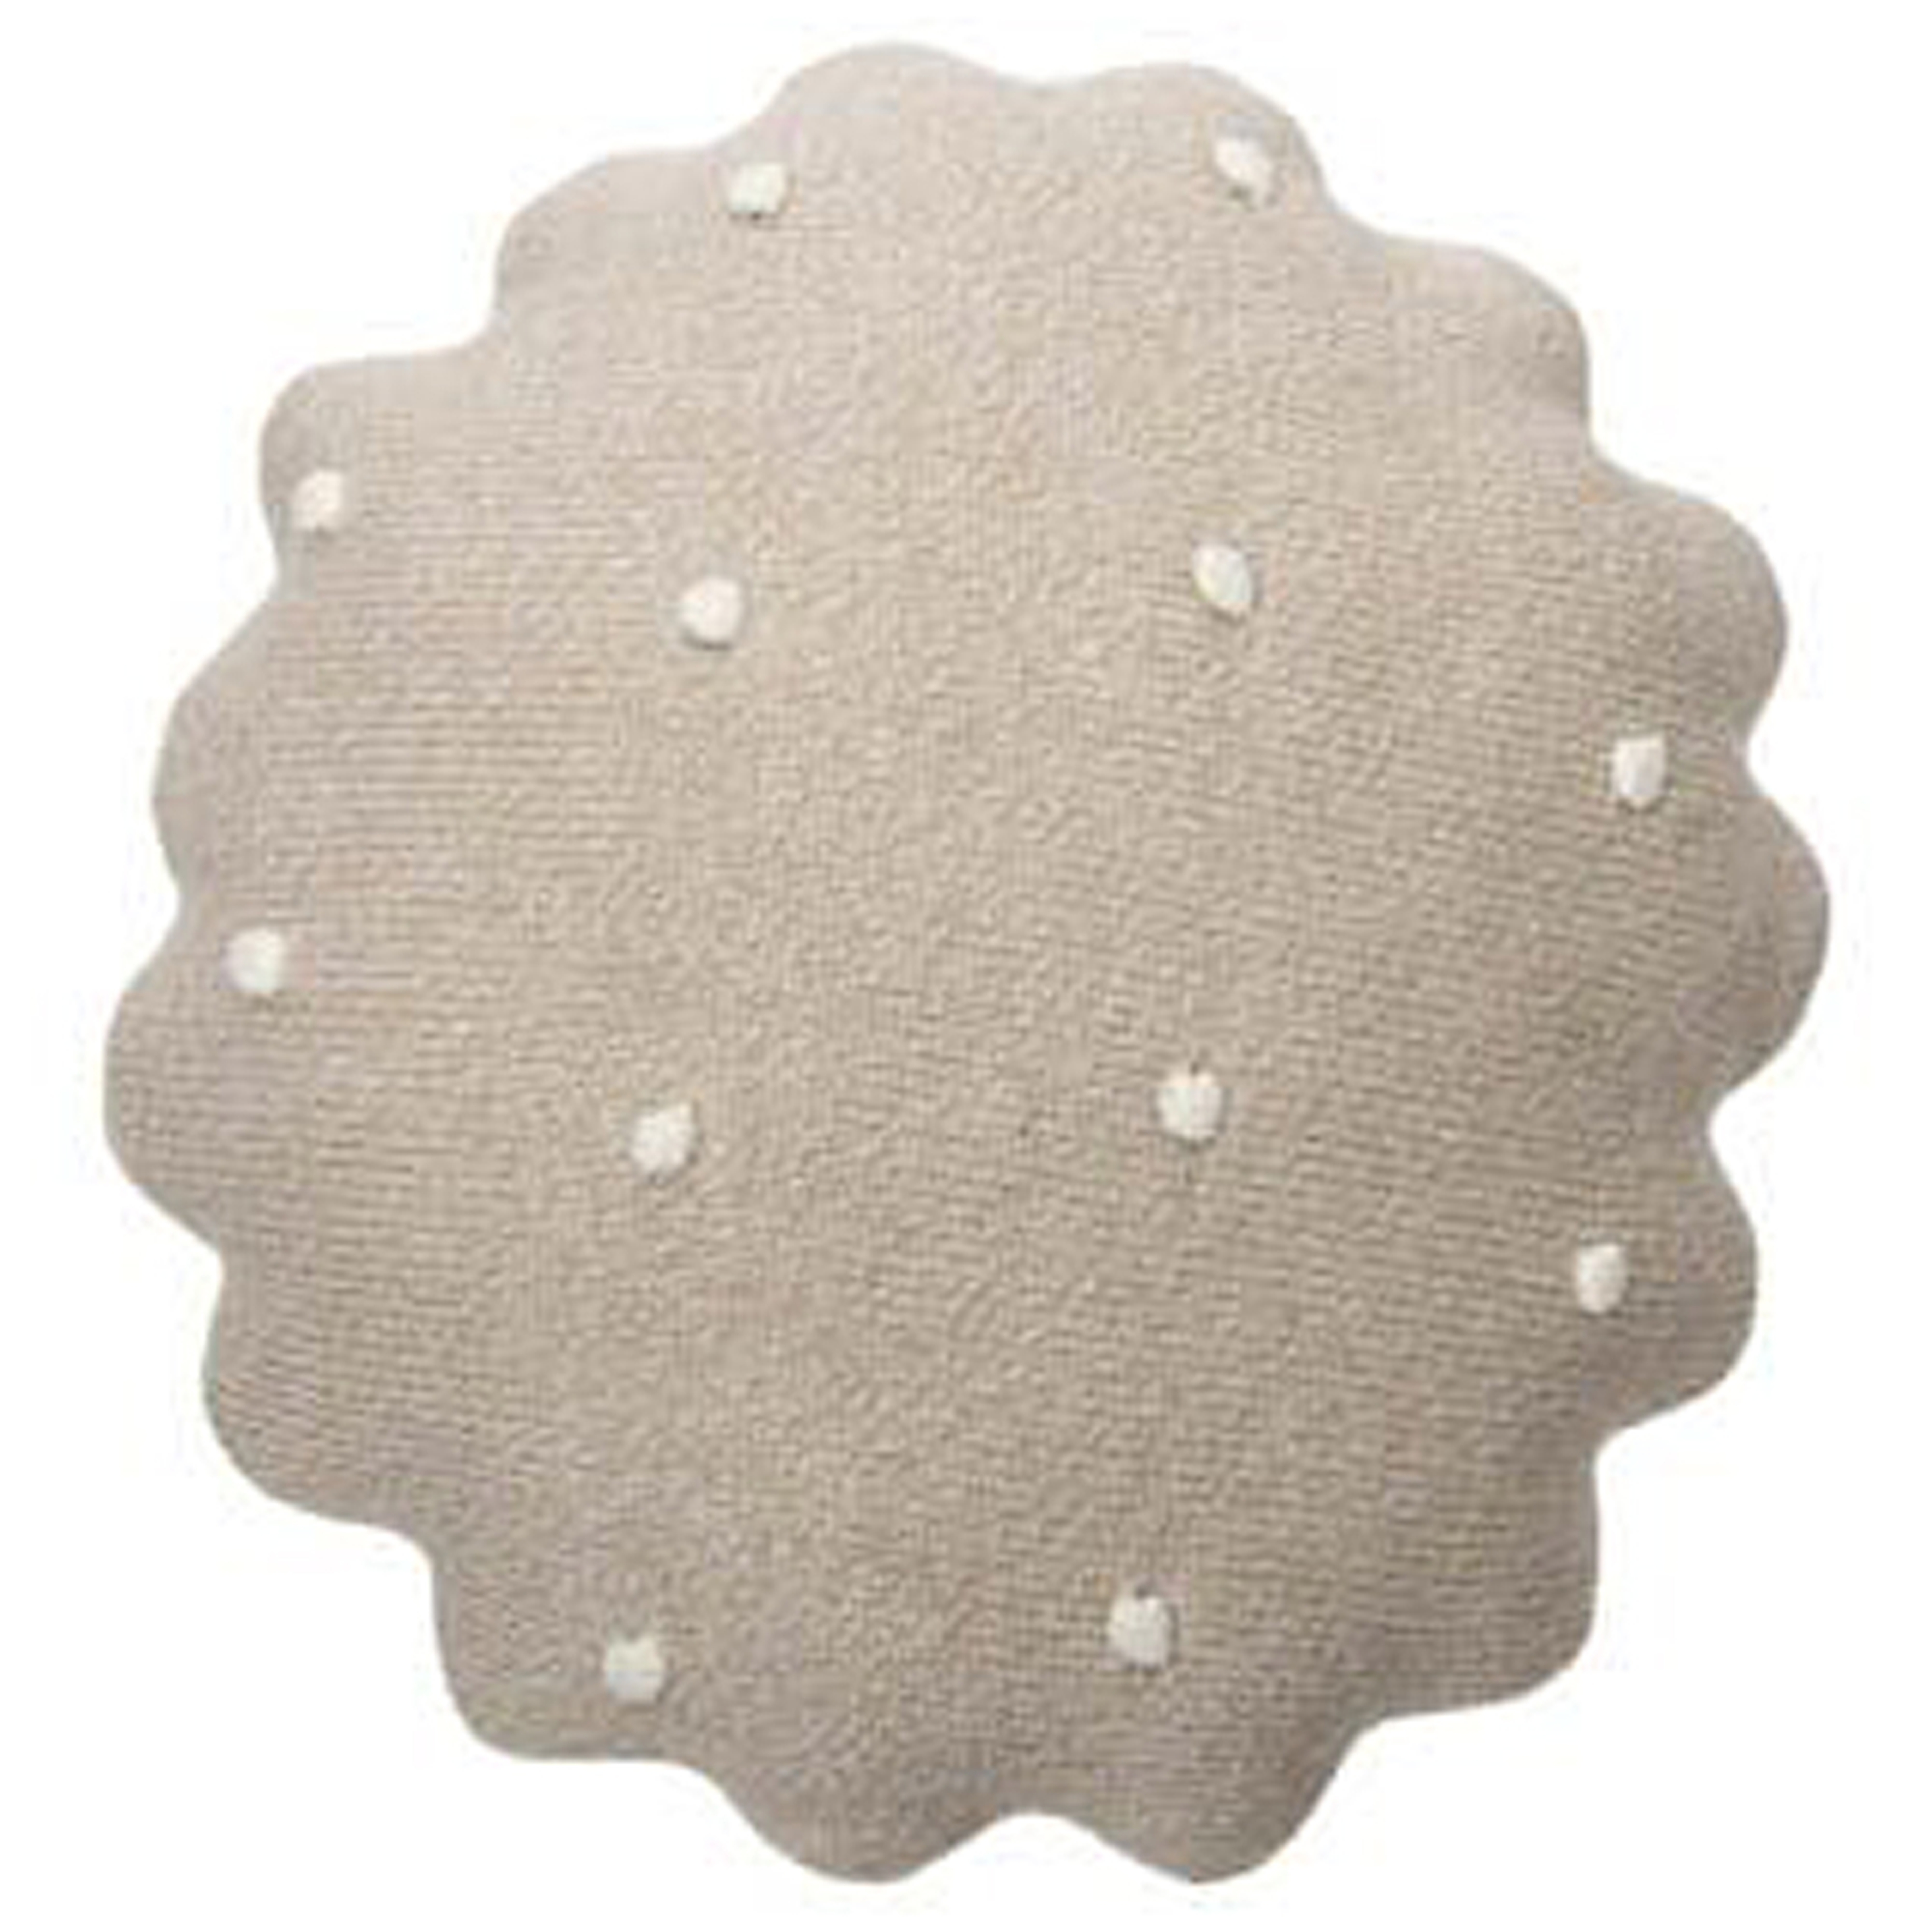 Lorena Canals Round Biscuit Modern Classic Beige Cotton Dotted Kids Pillow - Kathy Kuo Home